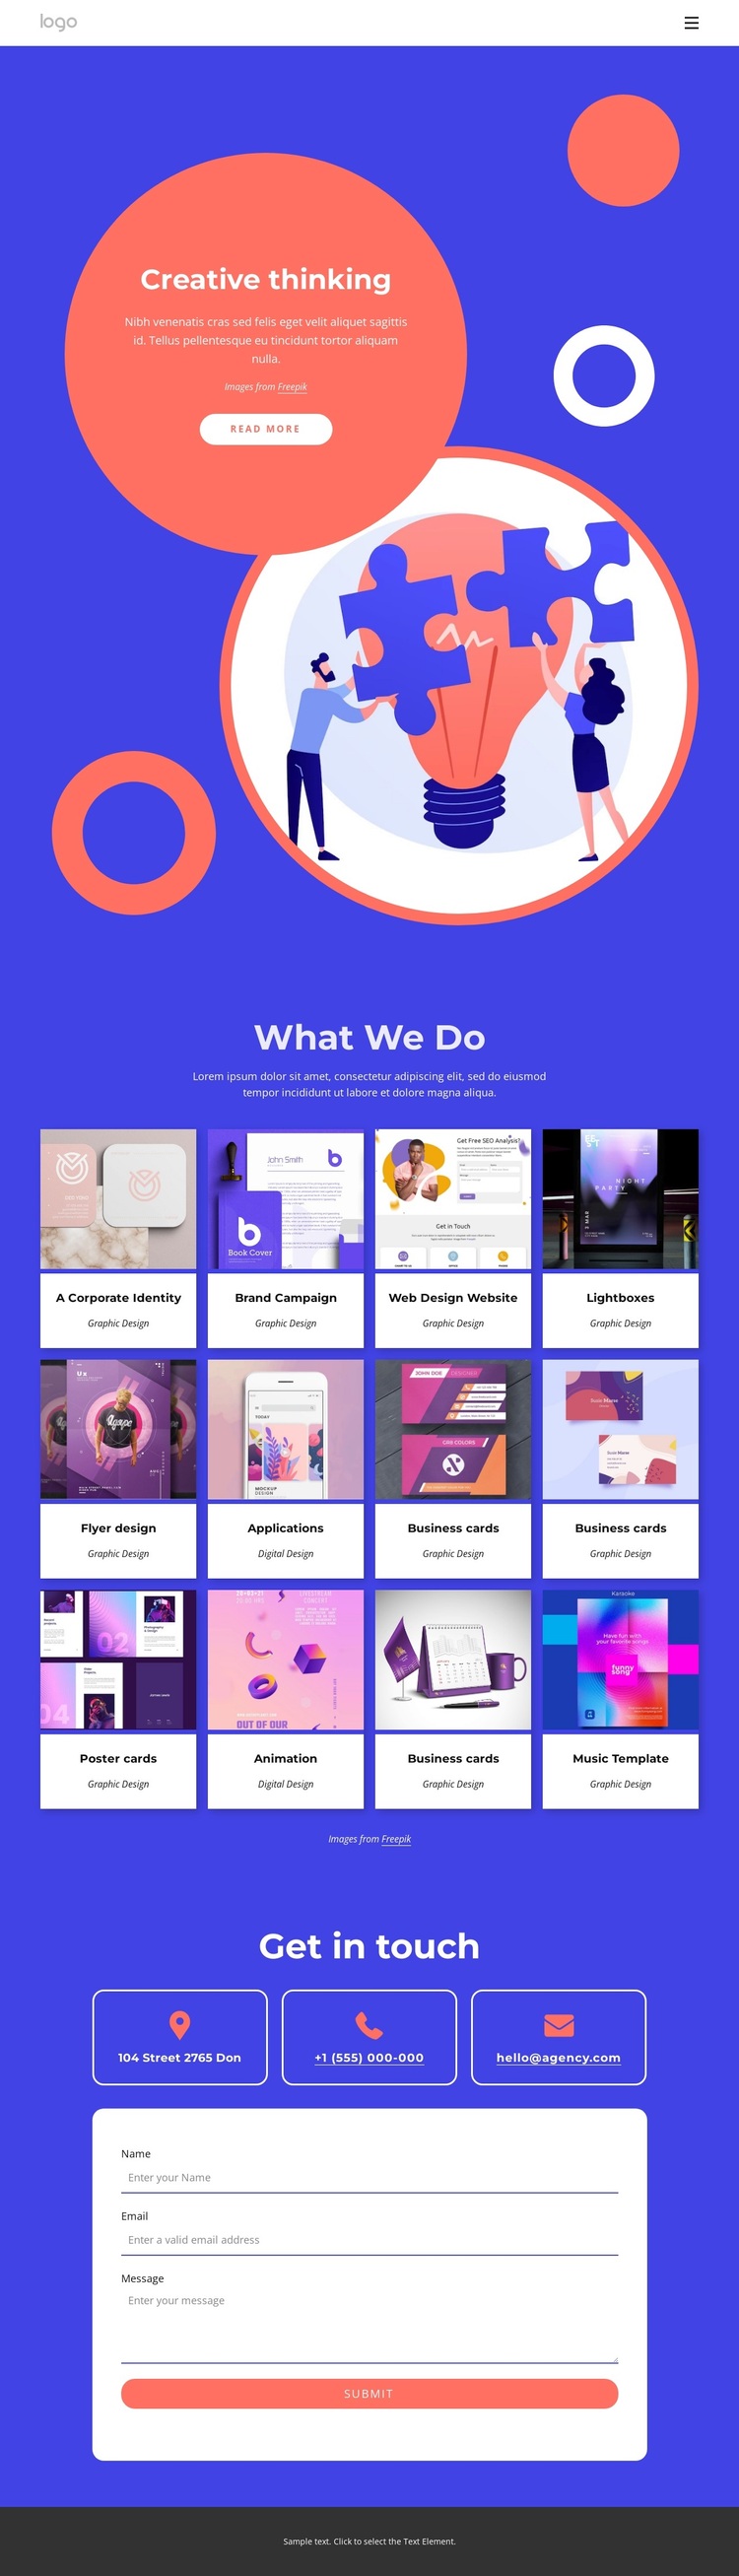 Campaigns, mobile and digital Template